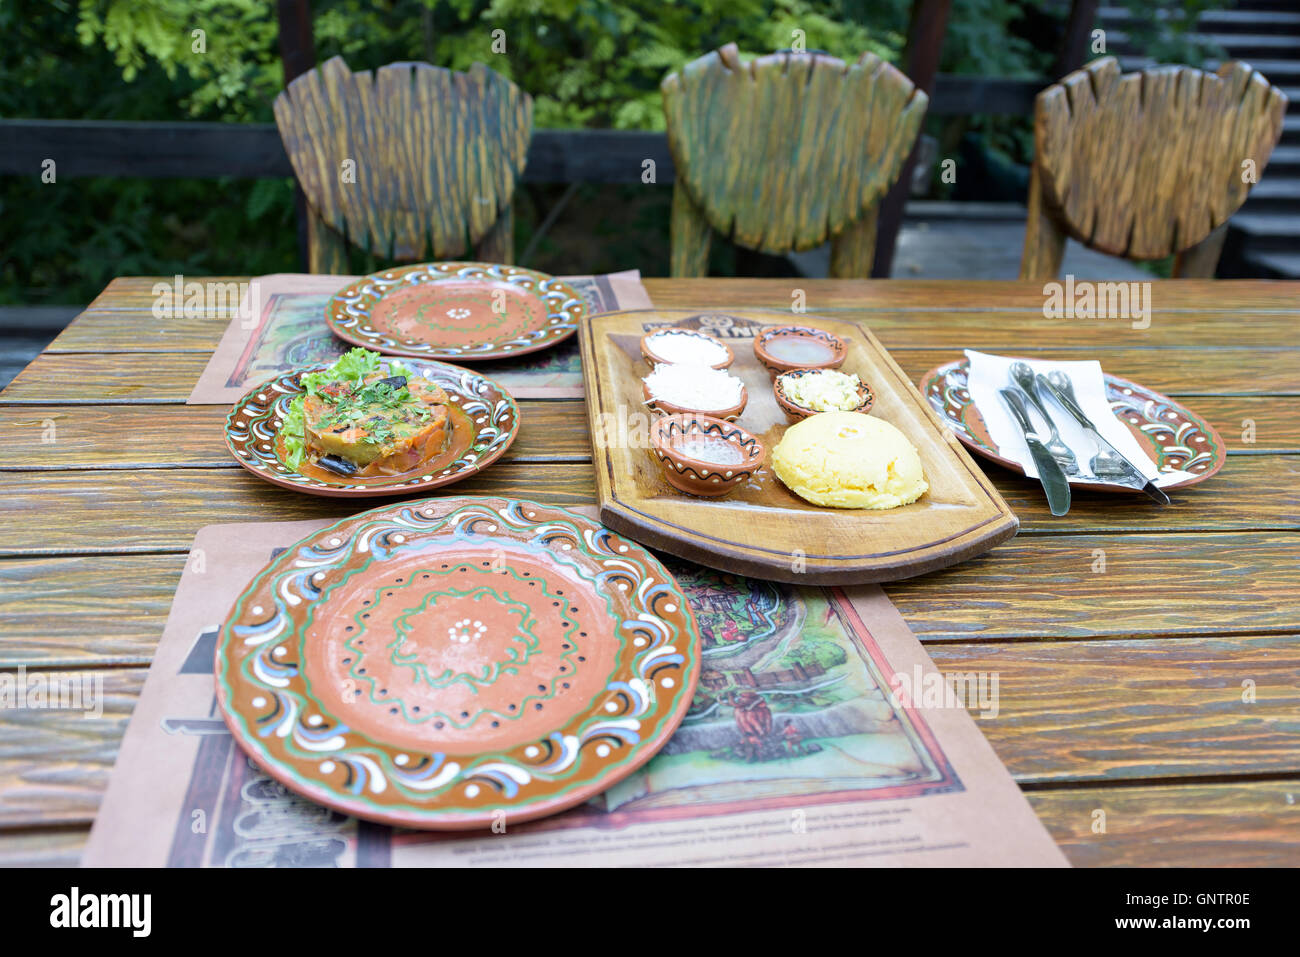 National food in traditional plates with ornaments on a restaurant table in Moldova Stock Photo